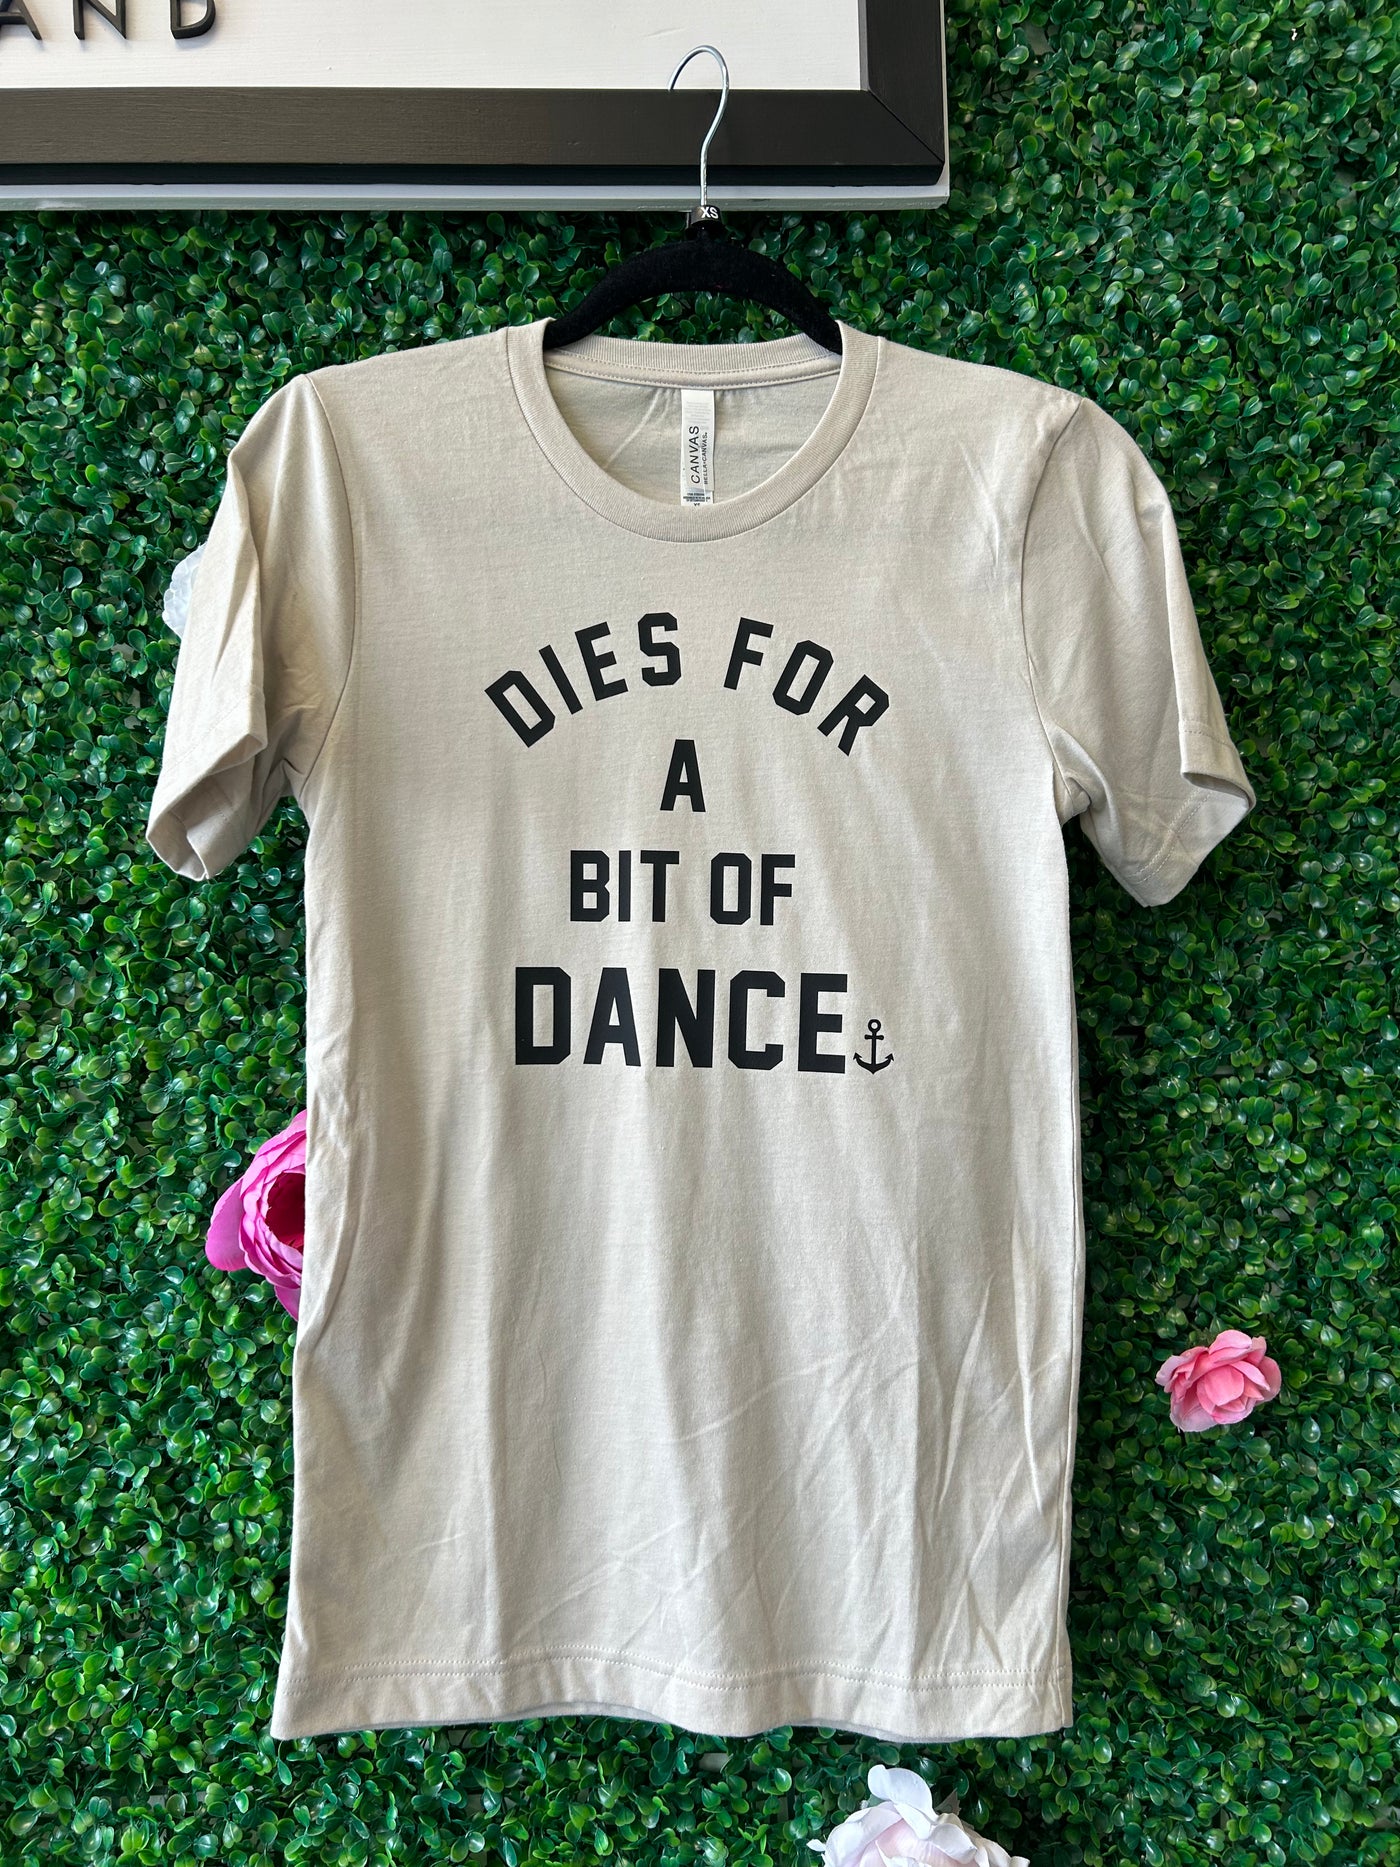 *CLEARANCE* “Dies For a Bit of Dance" Unisex T-Shirt  - Sand Beige - Size Adult XS